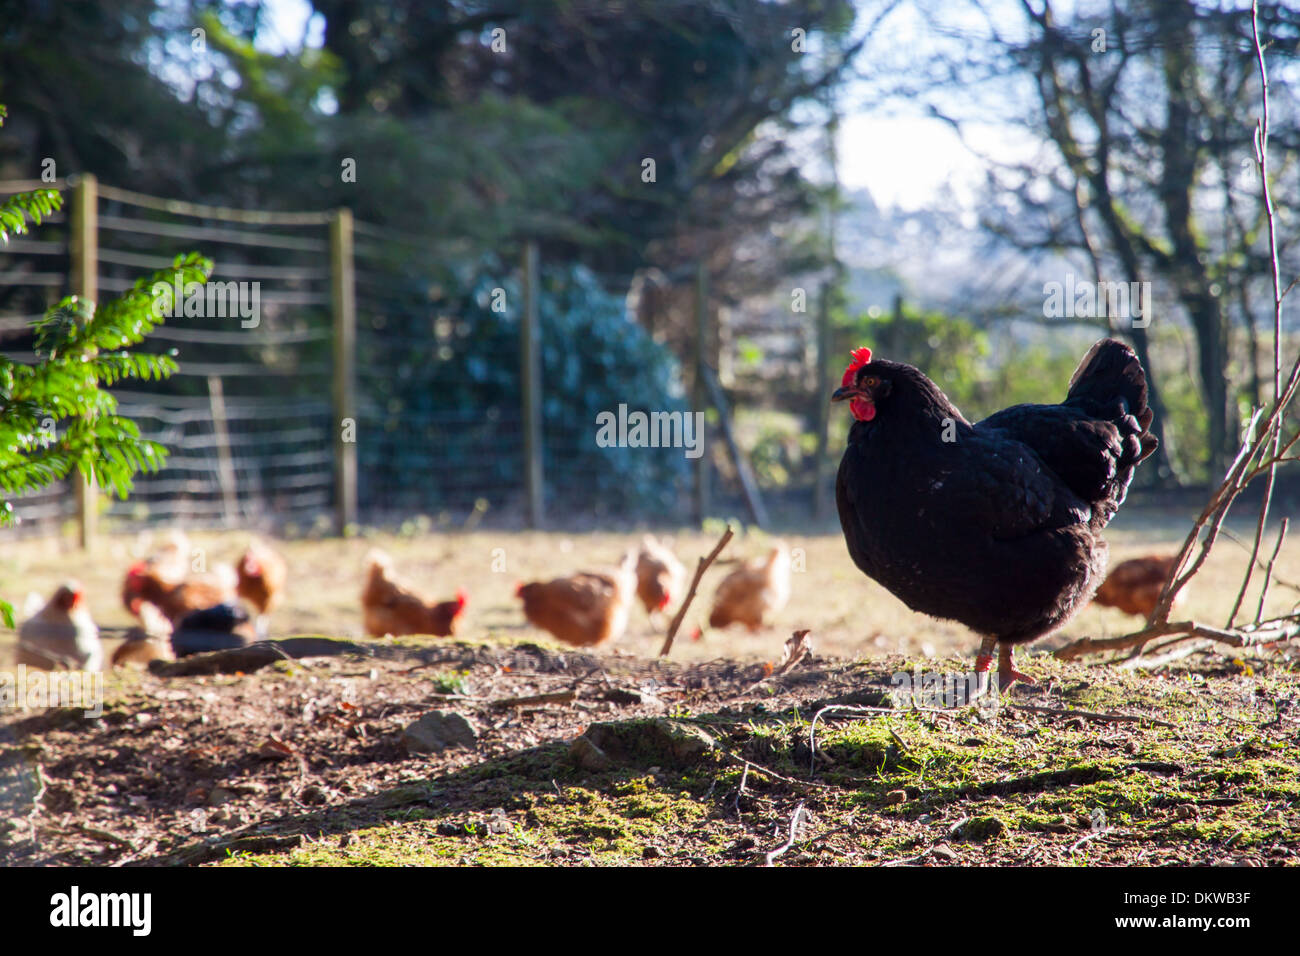 King of the Chickens - A small chicken run on Dartmoor Stock Photo